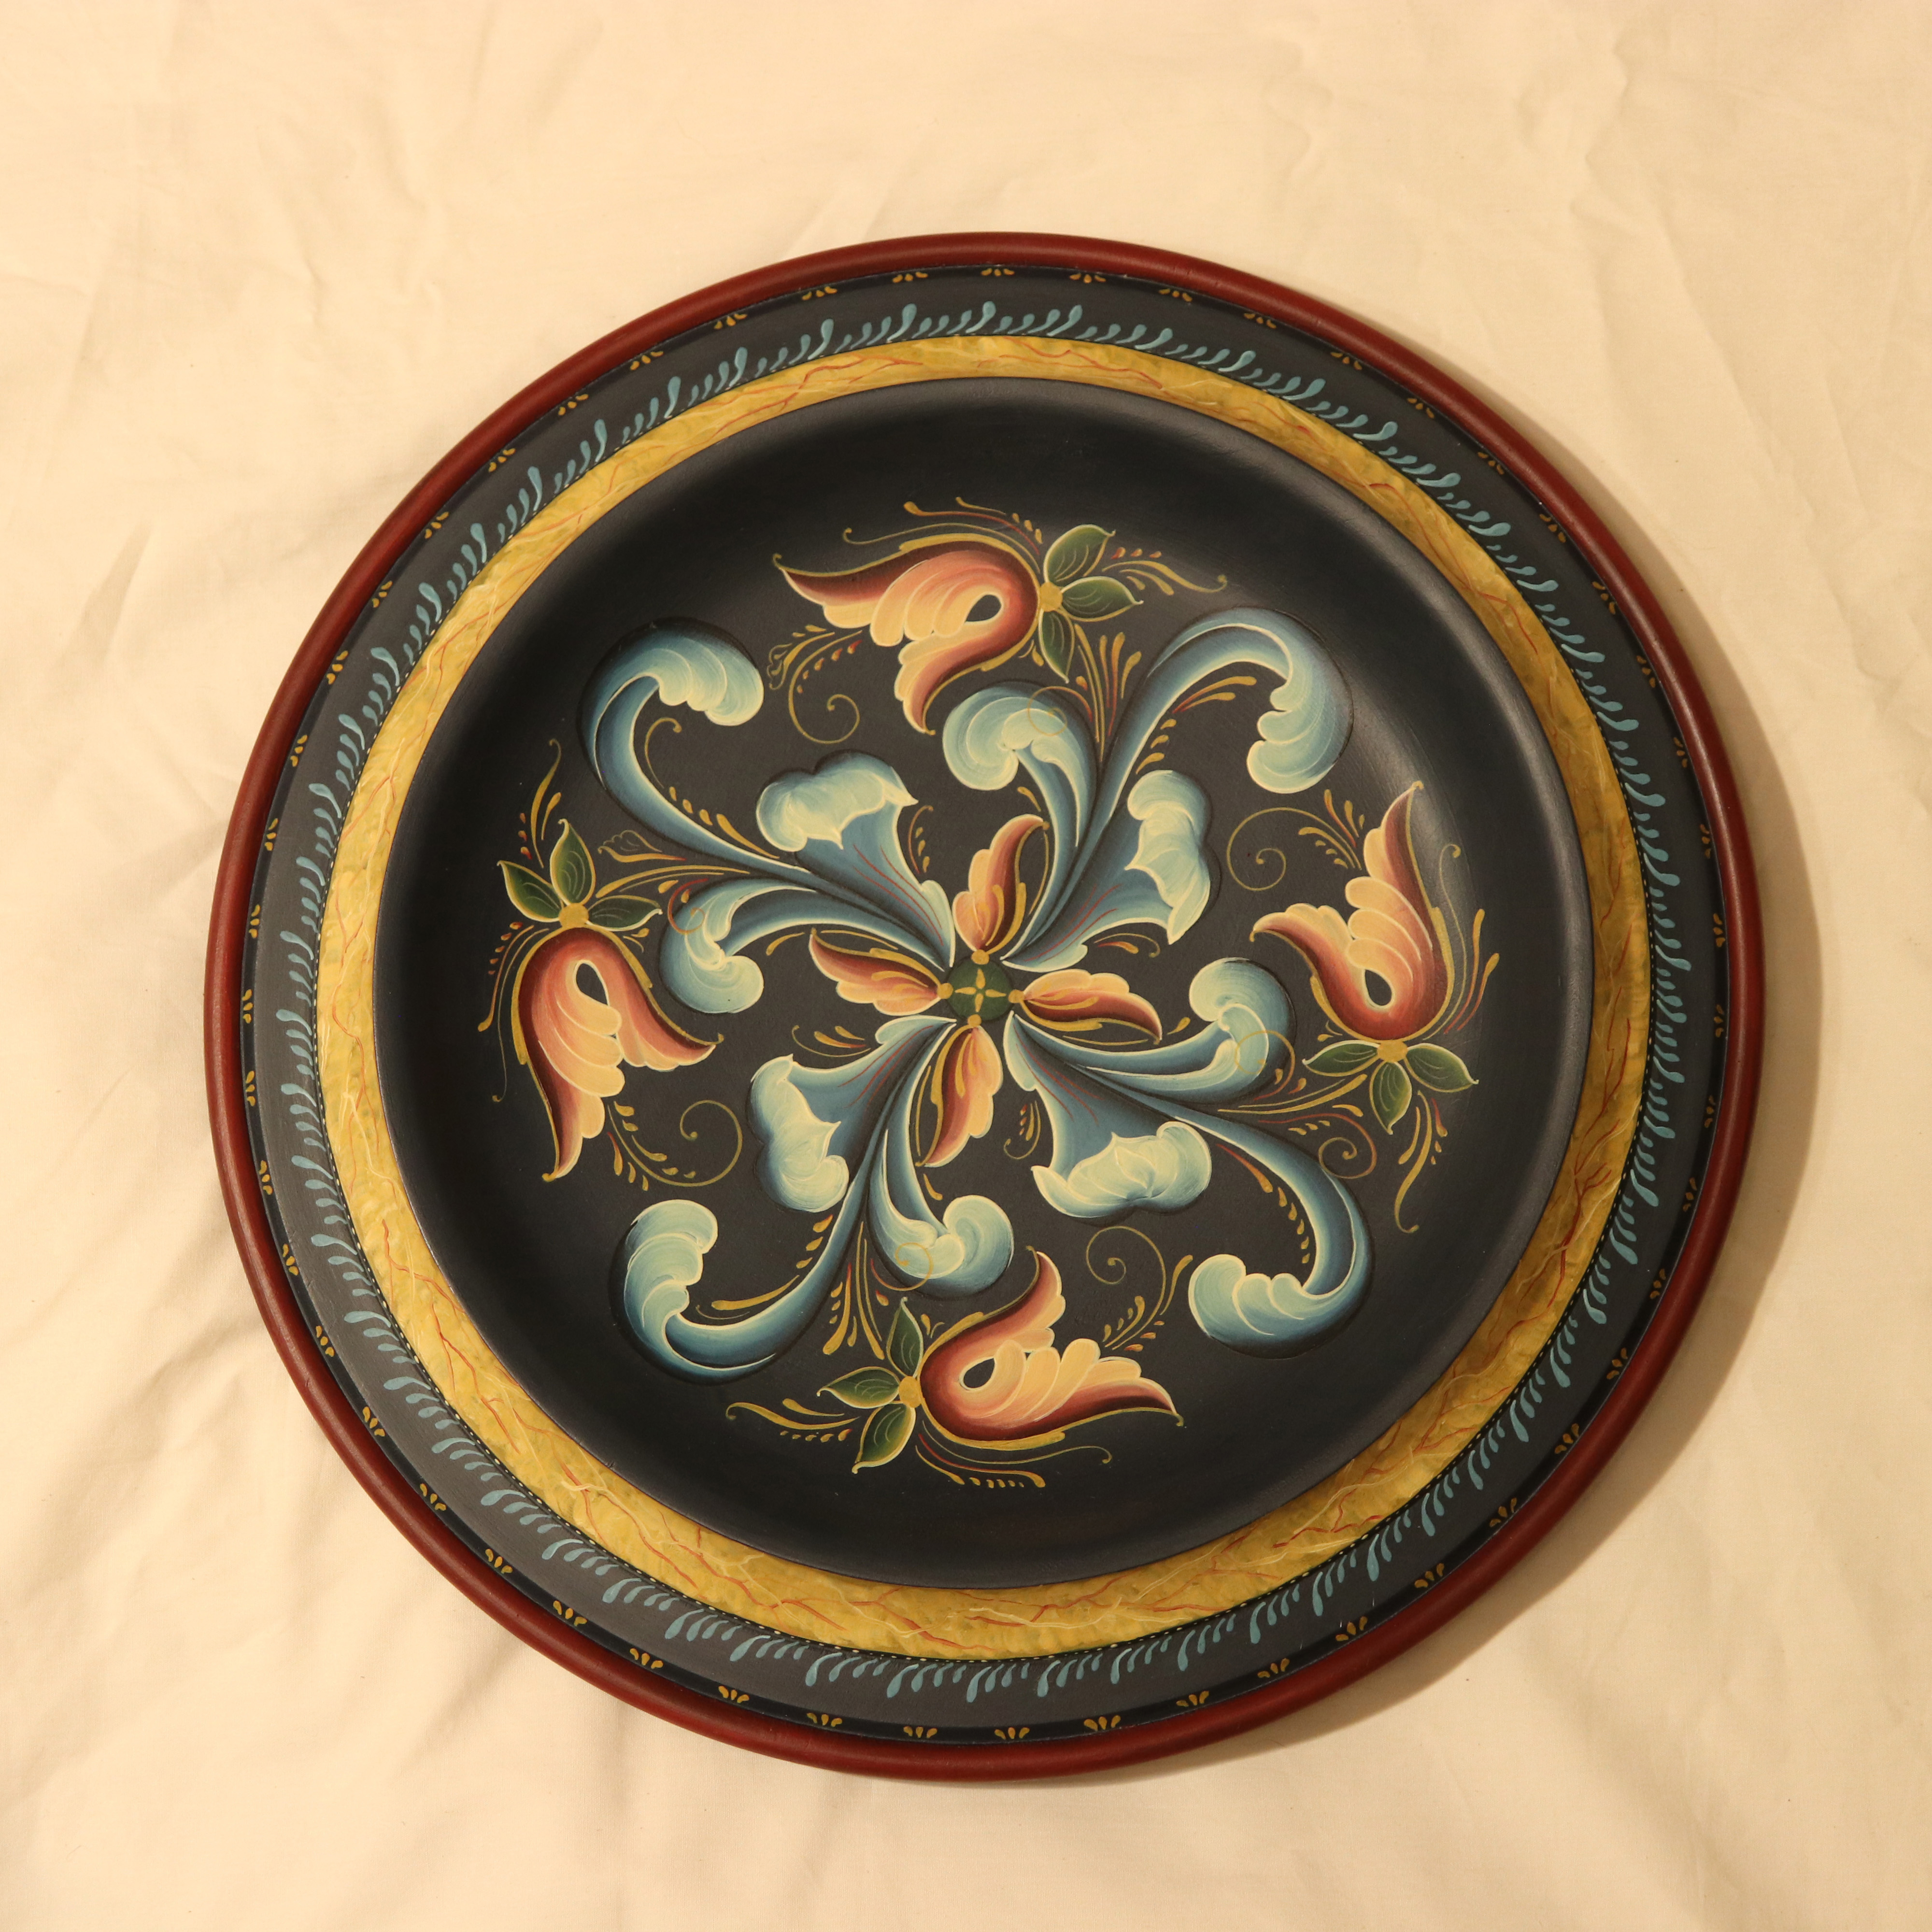 shallow bowl with rosemaling painting with blue and orange acanthus leaves (gudbrandsdal style)